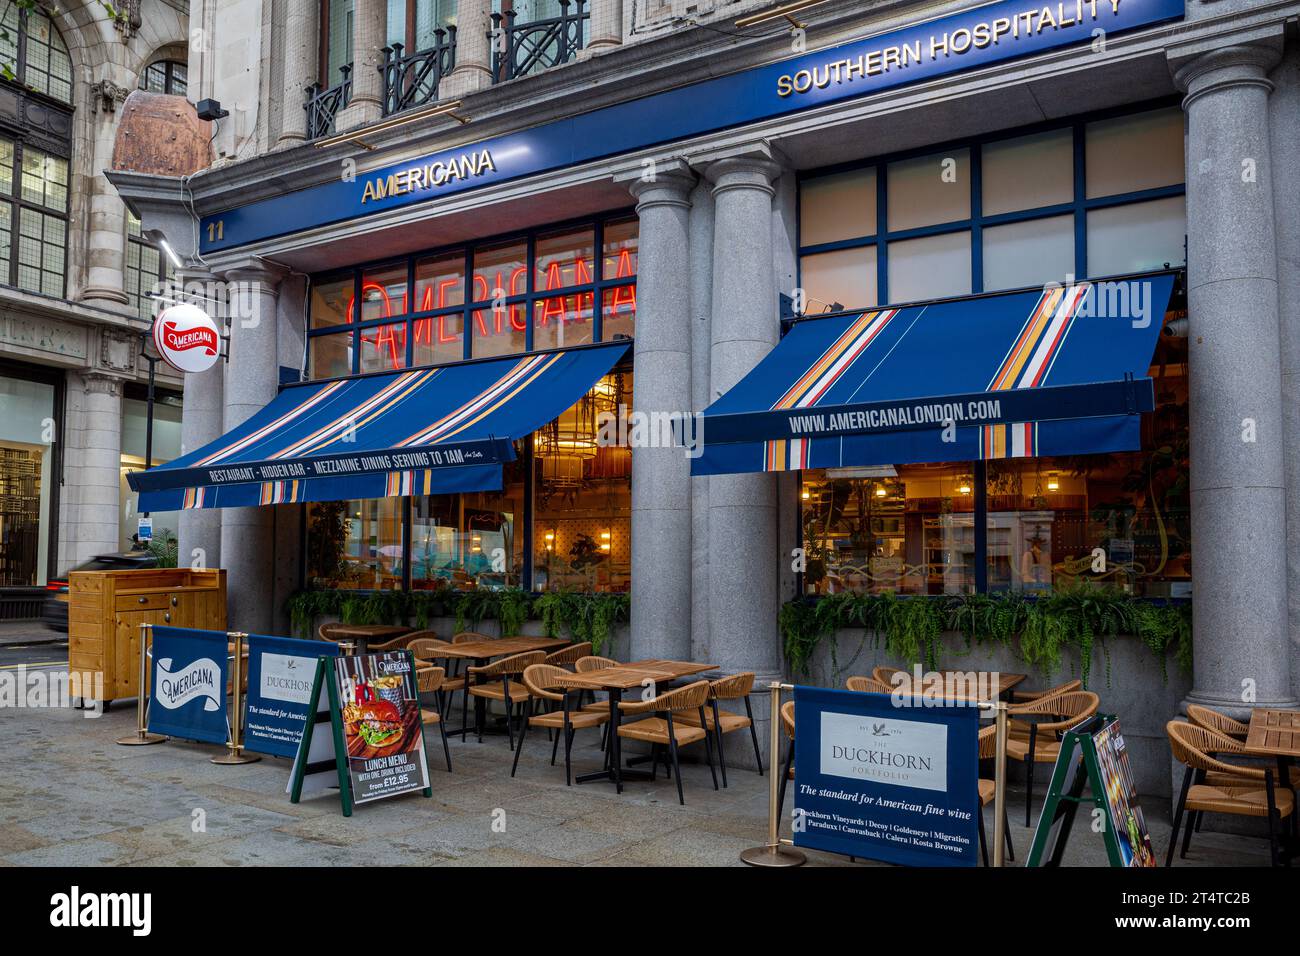 Americana Restaurant London. The Americana restaurant at 11 Haymarket, London, Southern hospitality & soul food in the heart of  London. Founded 2023. Stock Photo